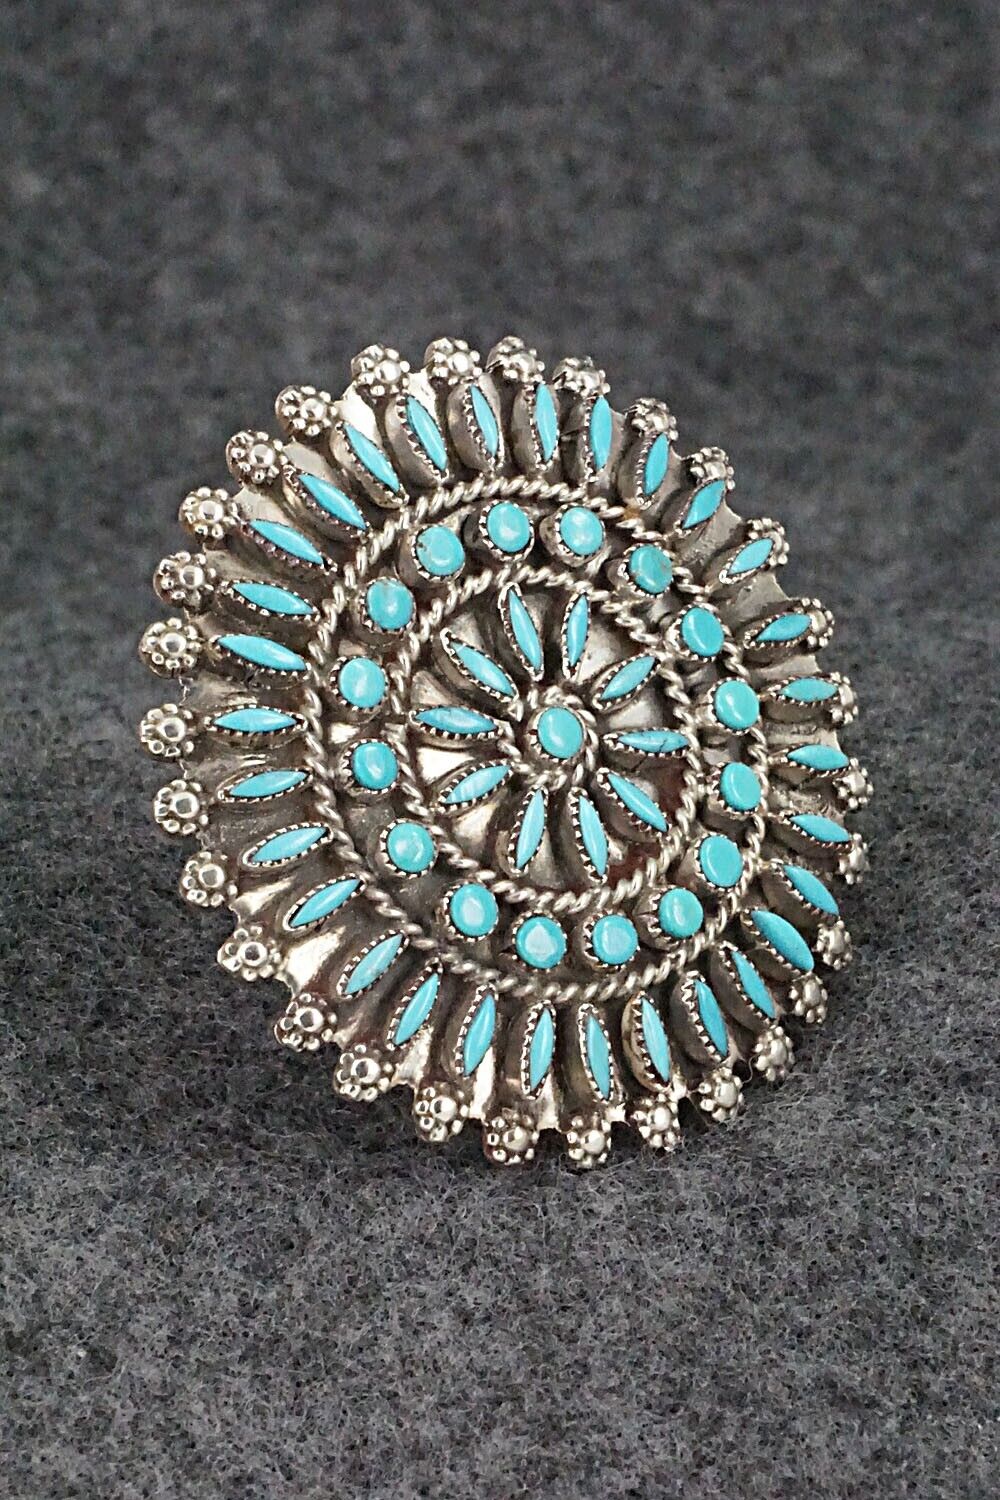 Turquoise & Sterling Silver Ring - Merlinda Chavez - Size 10